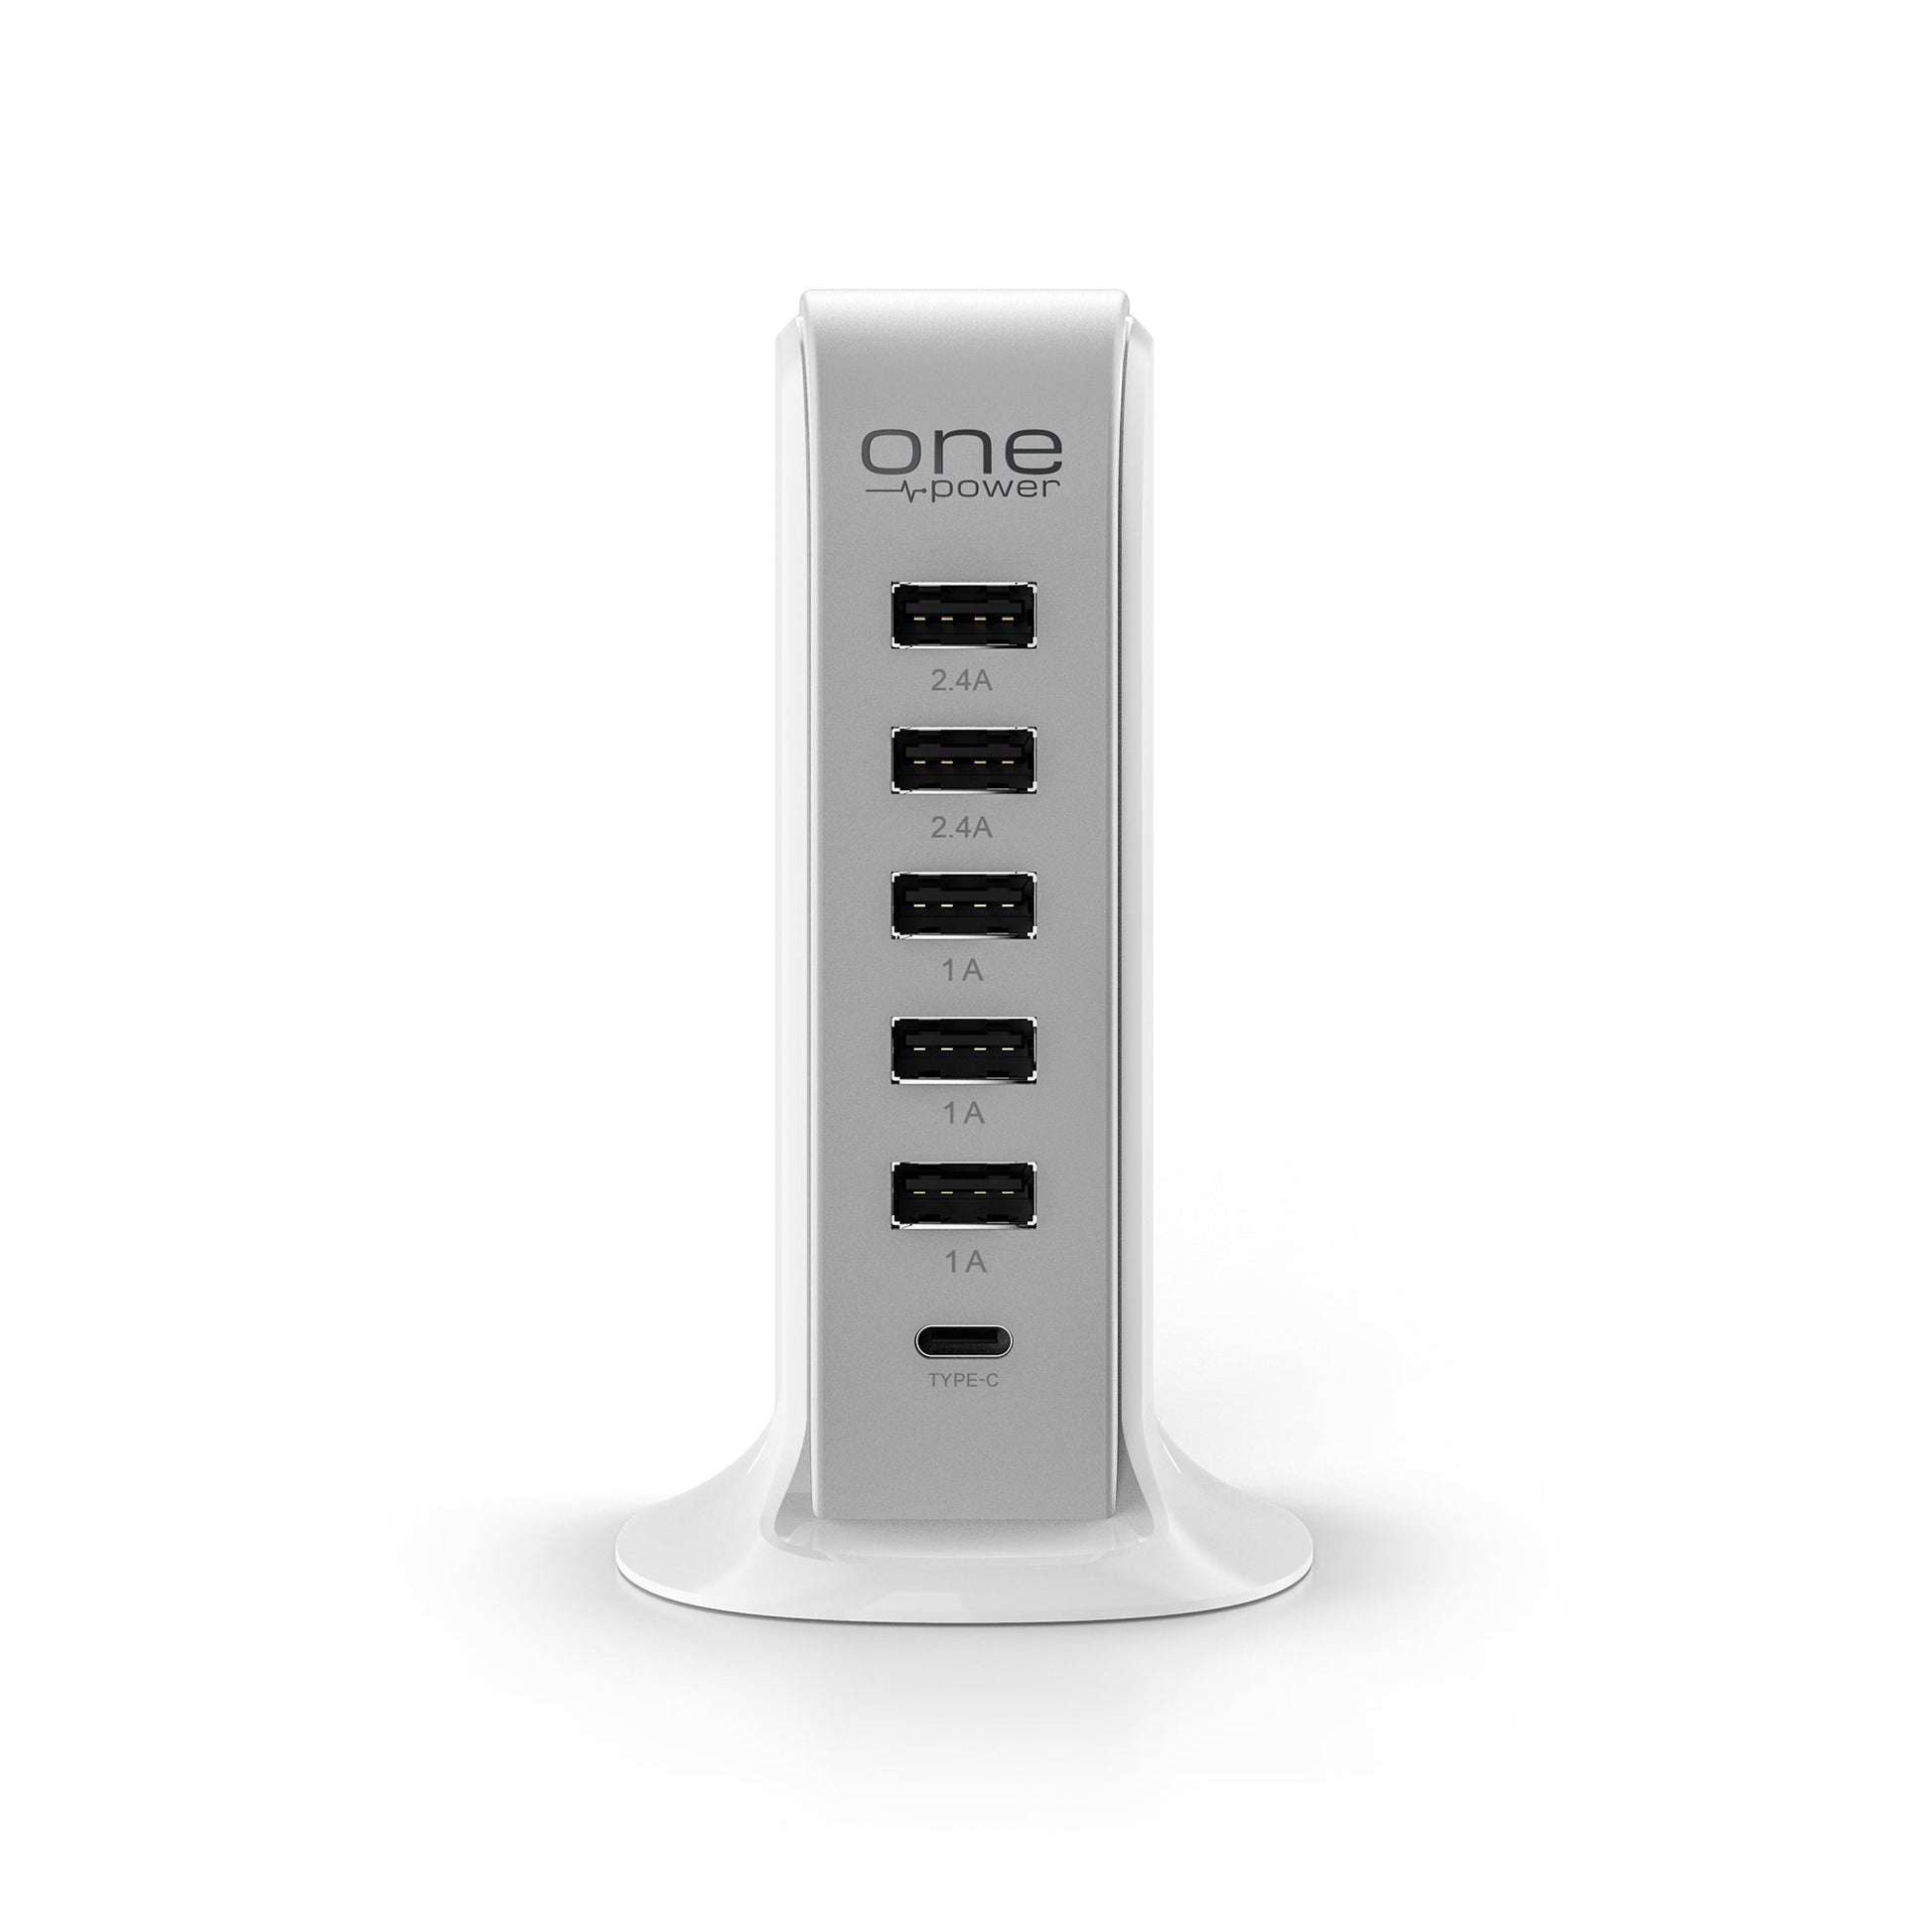 6 USB Port Desktop Charging Tower Hub (OPT061) freeshipping - One Products